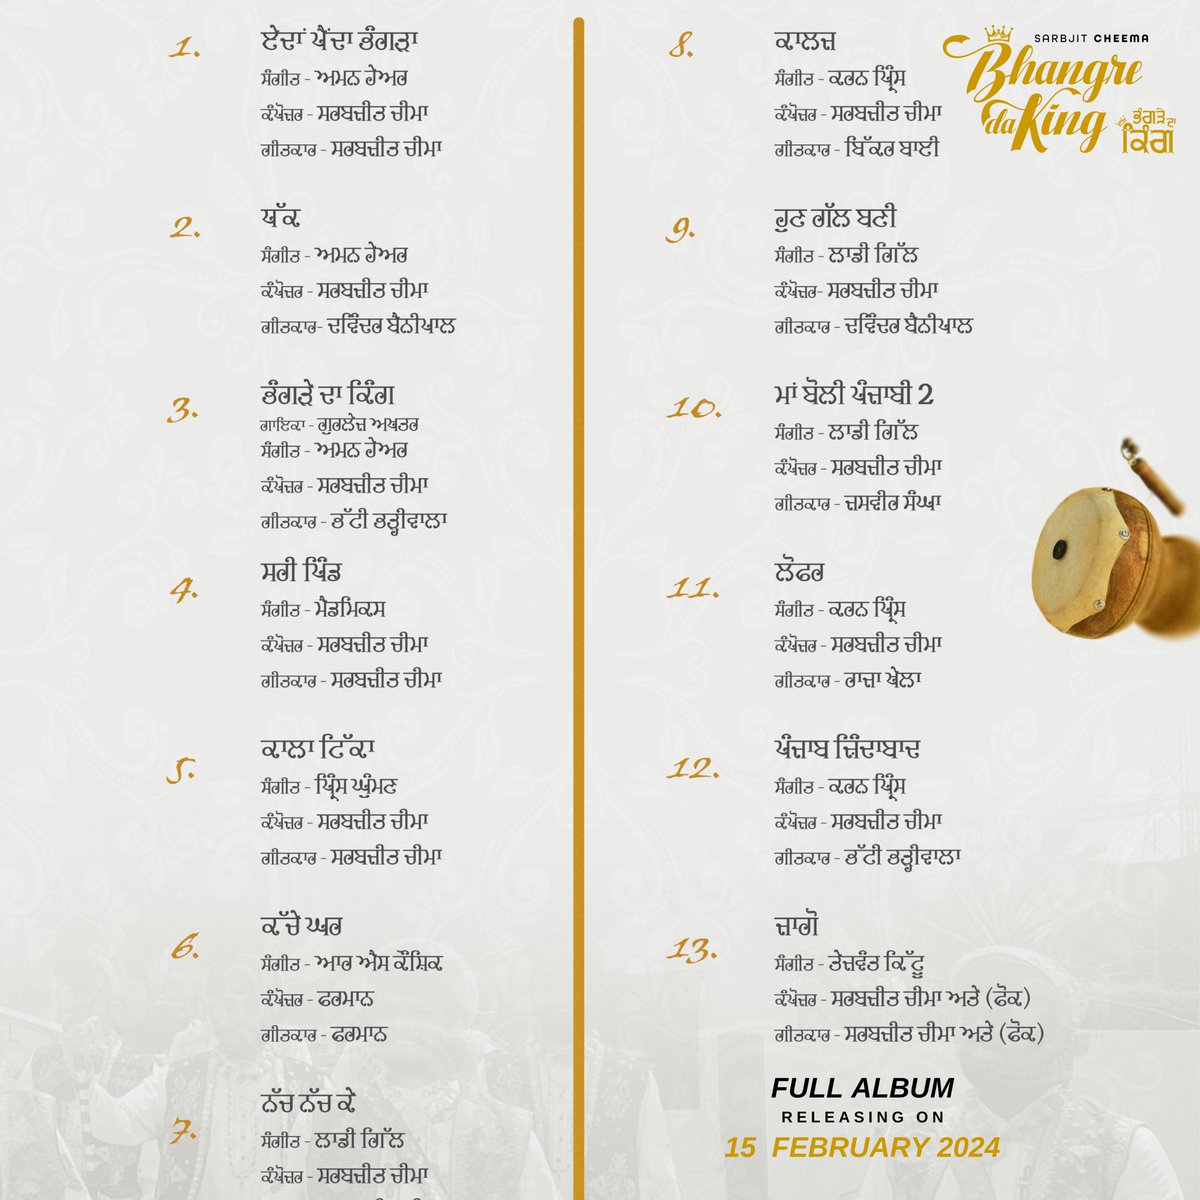 Presenting you the SONG LIST of Bhangre Da King Full Album releasing on February 15th @AmanHayer1 #SarbjitCheema